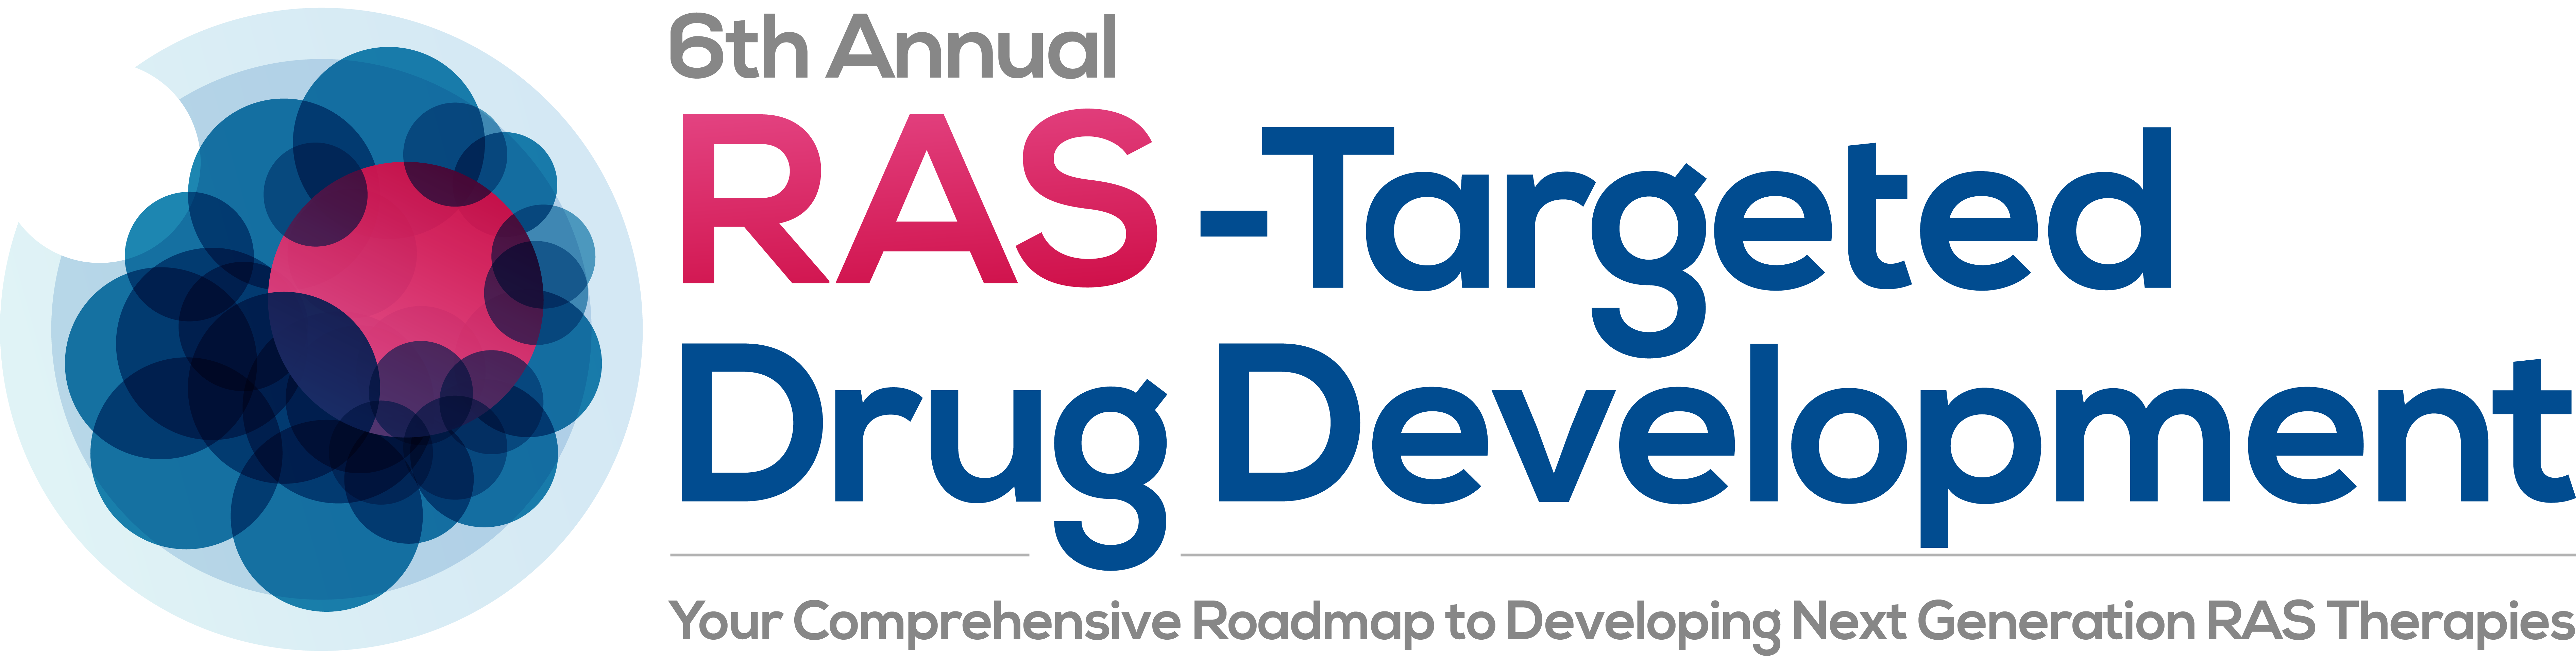 21516 6th RAS Targeted Drug Discovery Summit logo